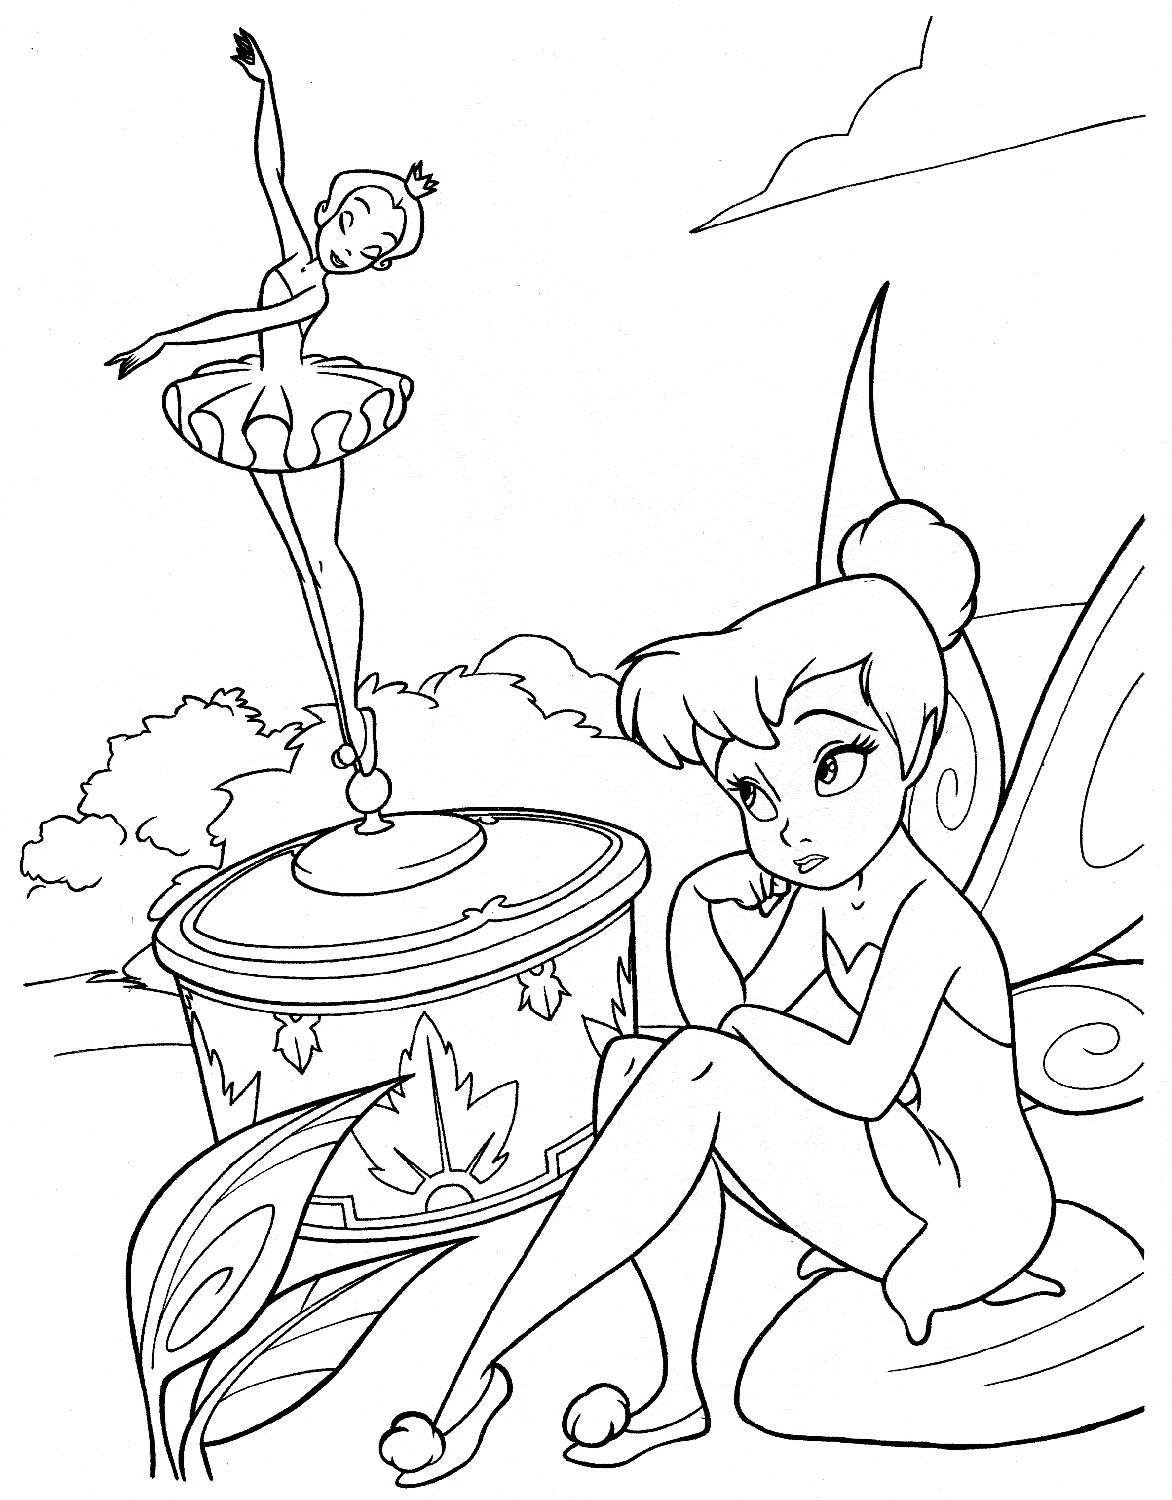 tinkerbell coloring coloring pages tinkerbell coloring pages and clip art coloring tinkerbell